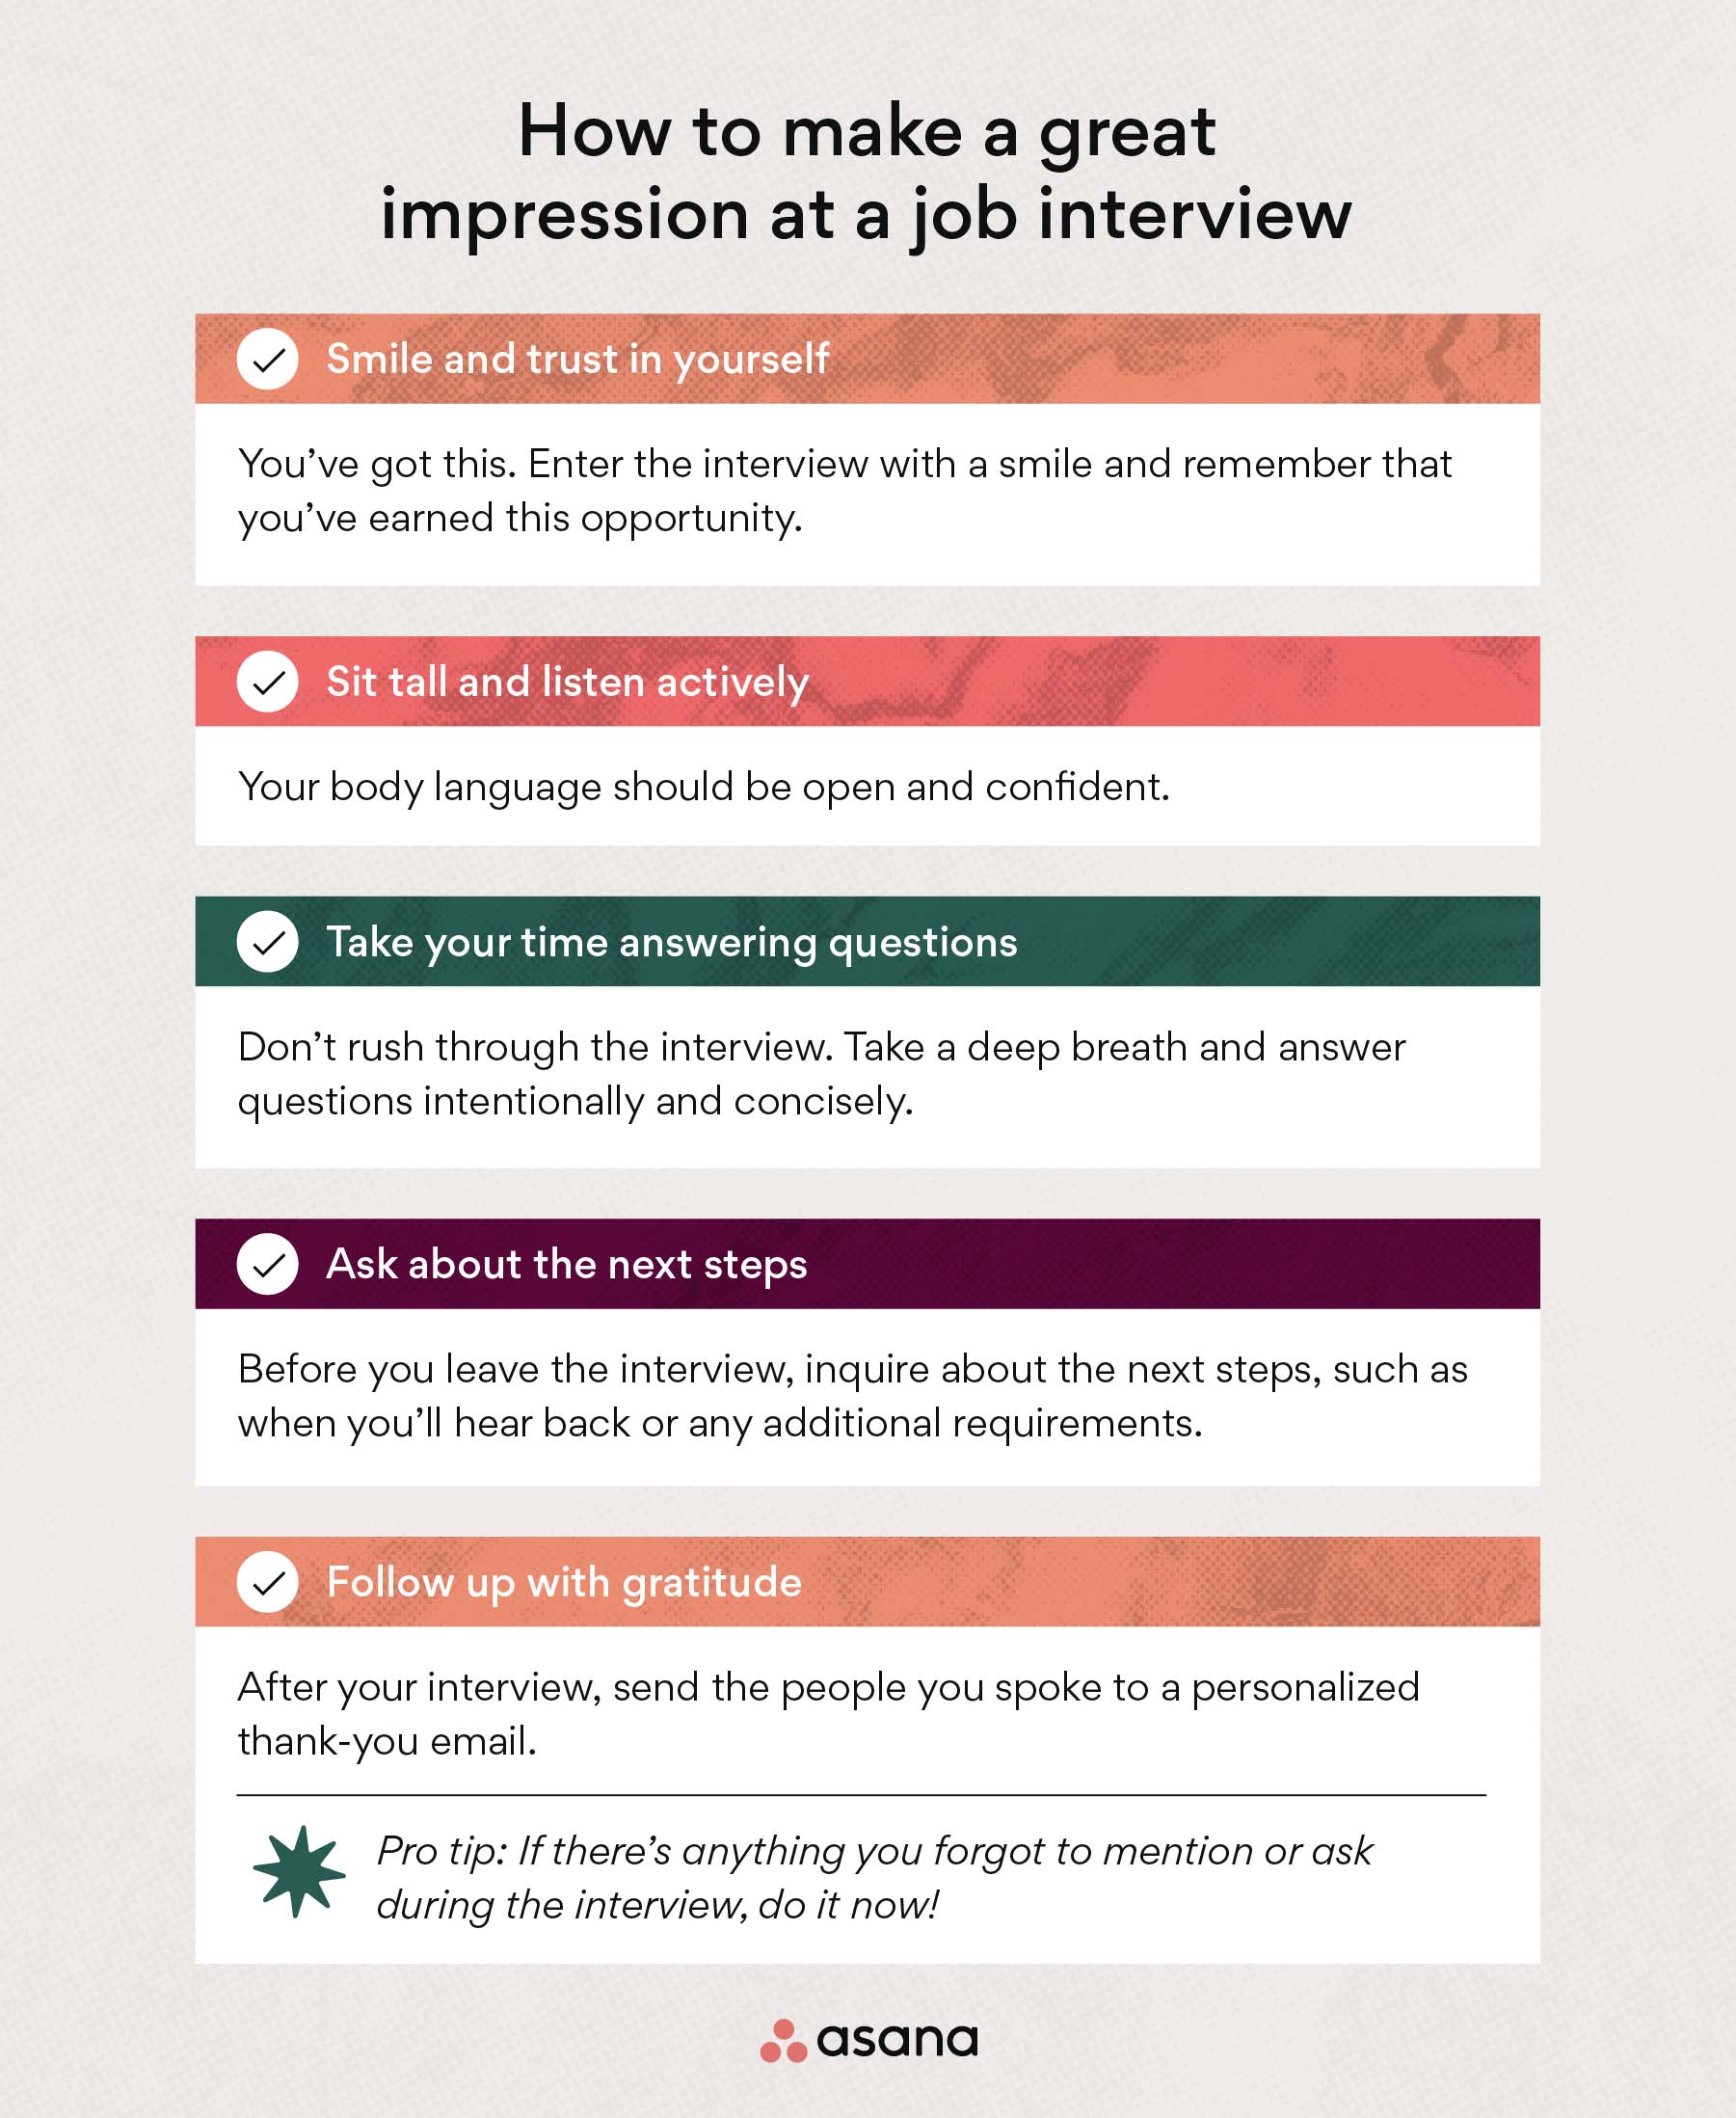 [inline illustration] how to make a great impression at a job interview (infographic)